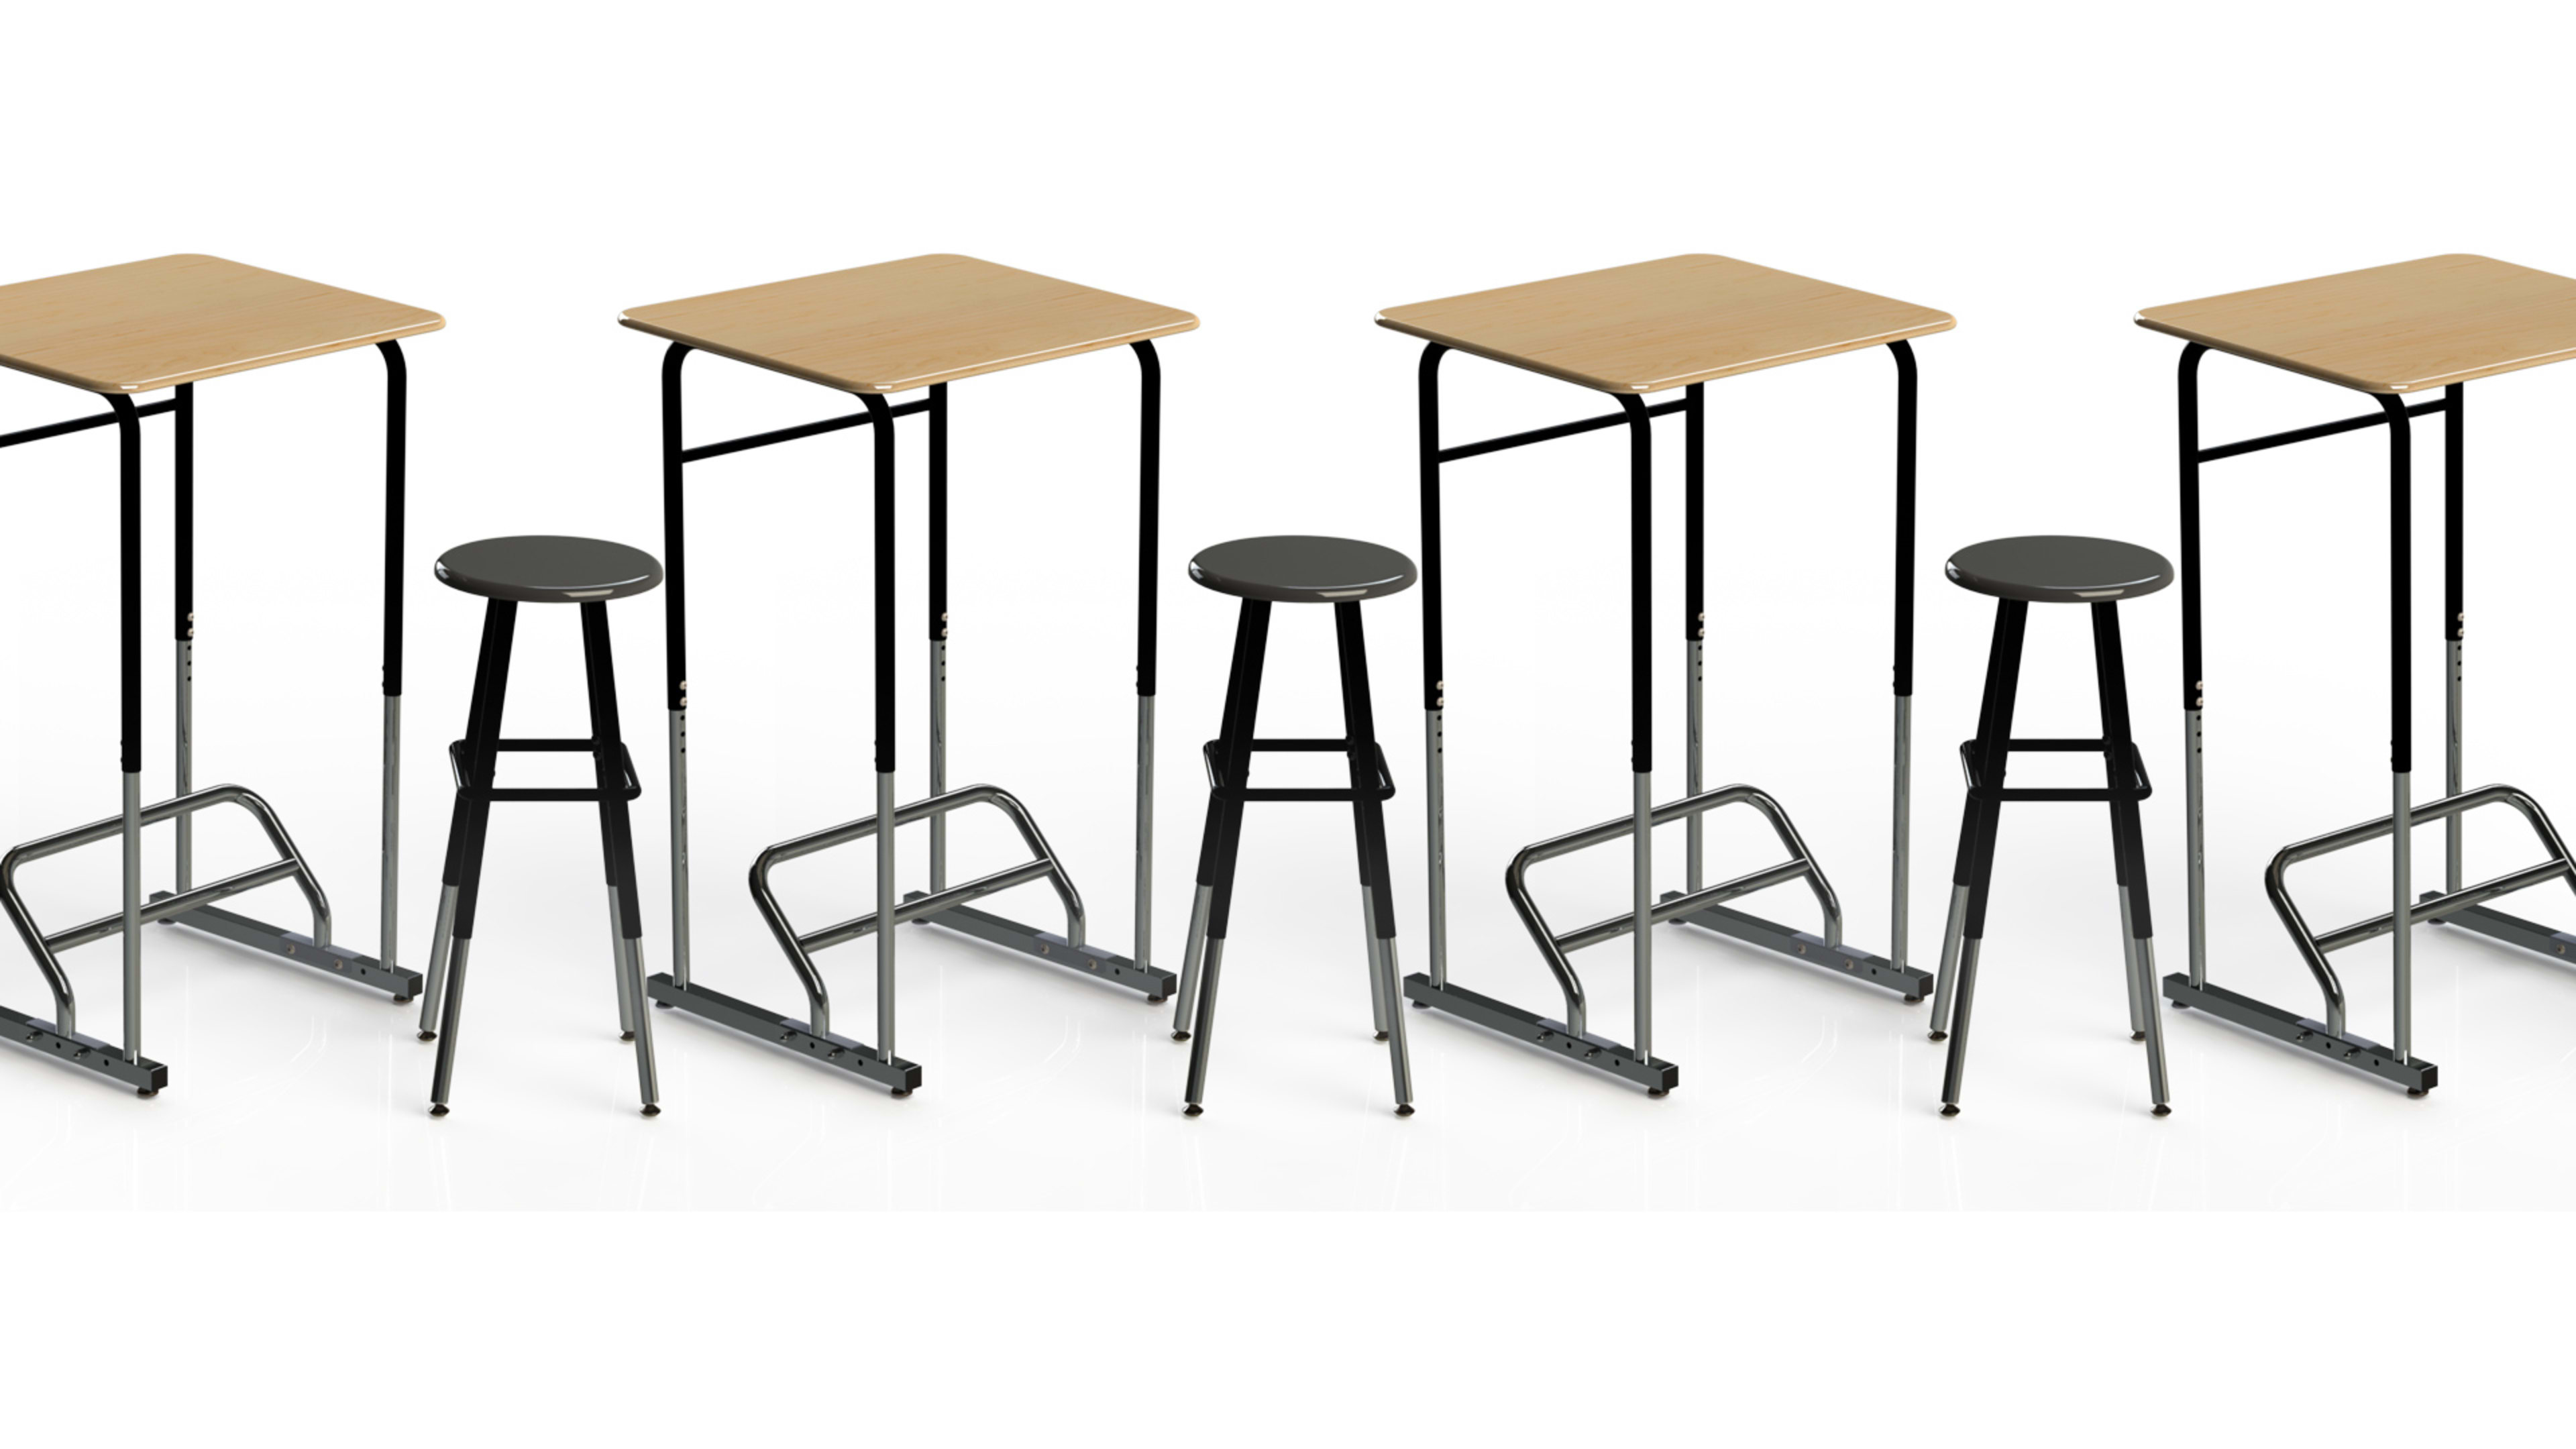 Standing Desks Are Coming To Schools, To Cure Obesity And Increase Attention Spans